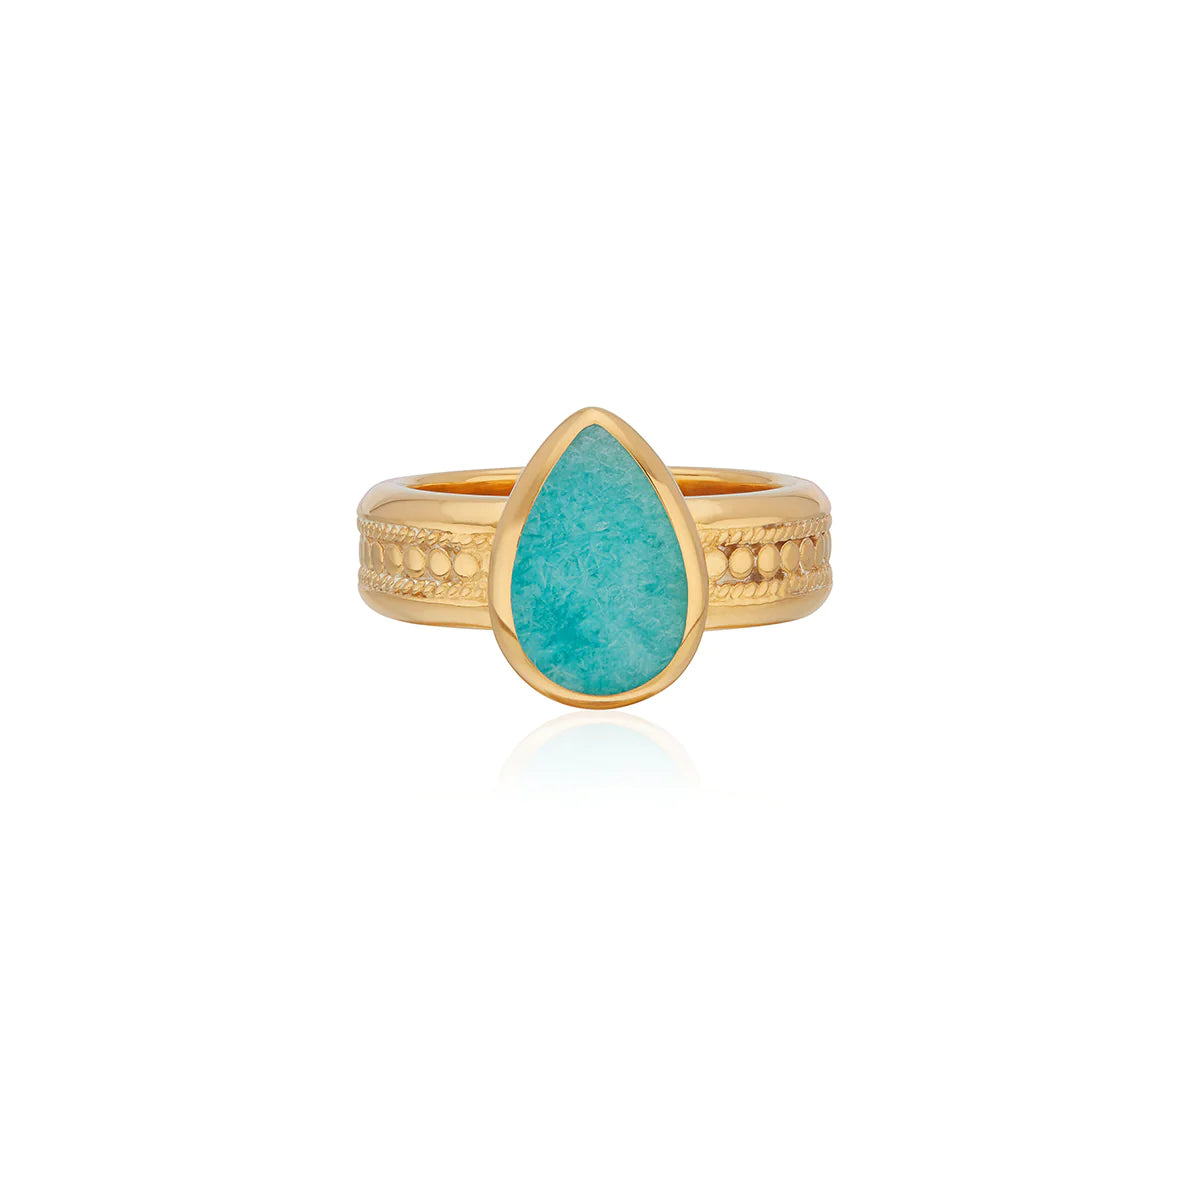 Gold and amazonite cocktail ring with a teardrop stone and gold dotted details on the band